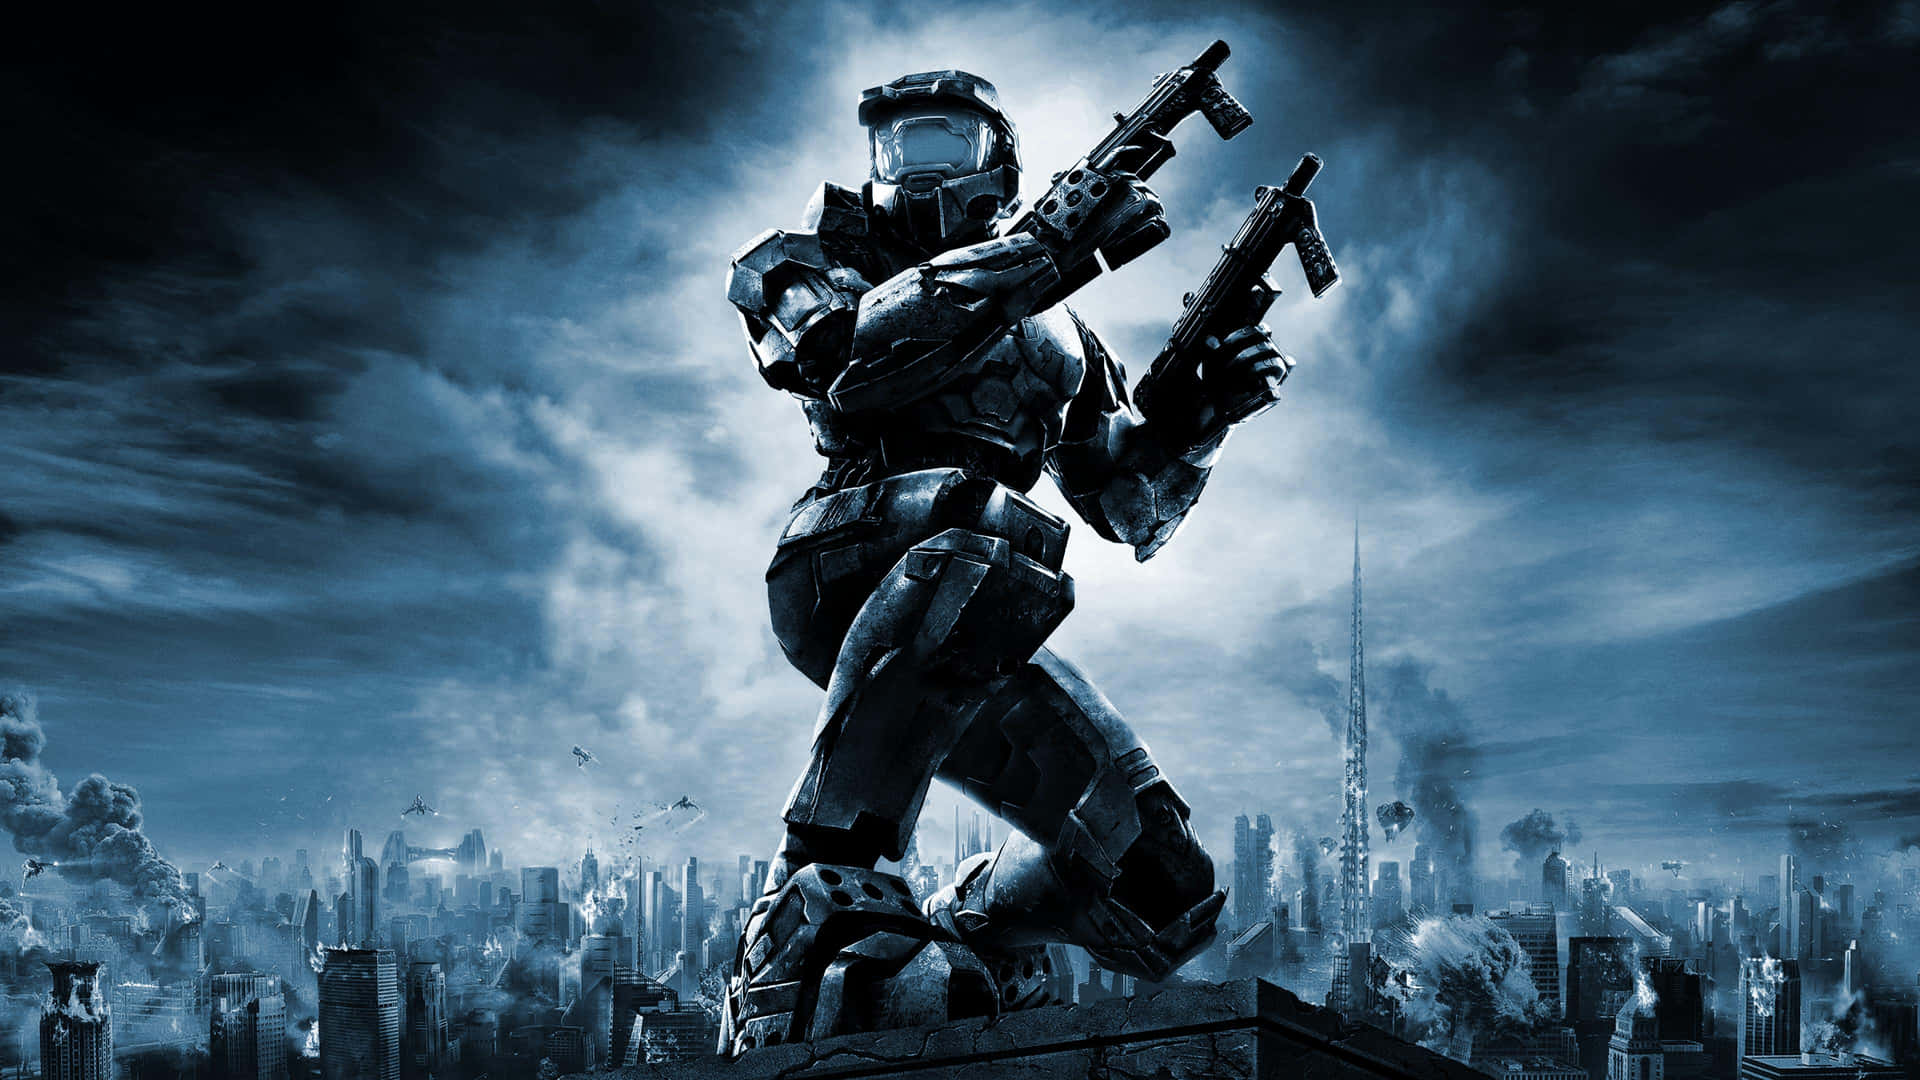 Wallpaper ID 383321  Video Game Halo 3 ODST Phone Wallpaper Futuristic  Warrior Soldier 1080x1920 free download